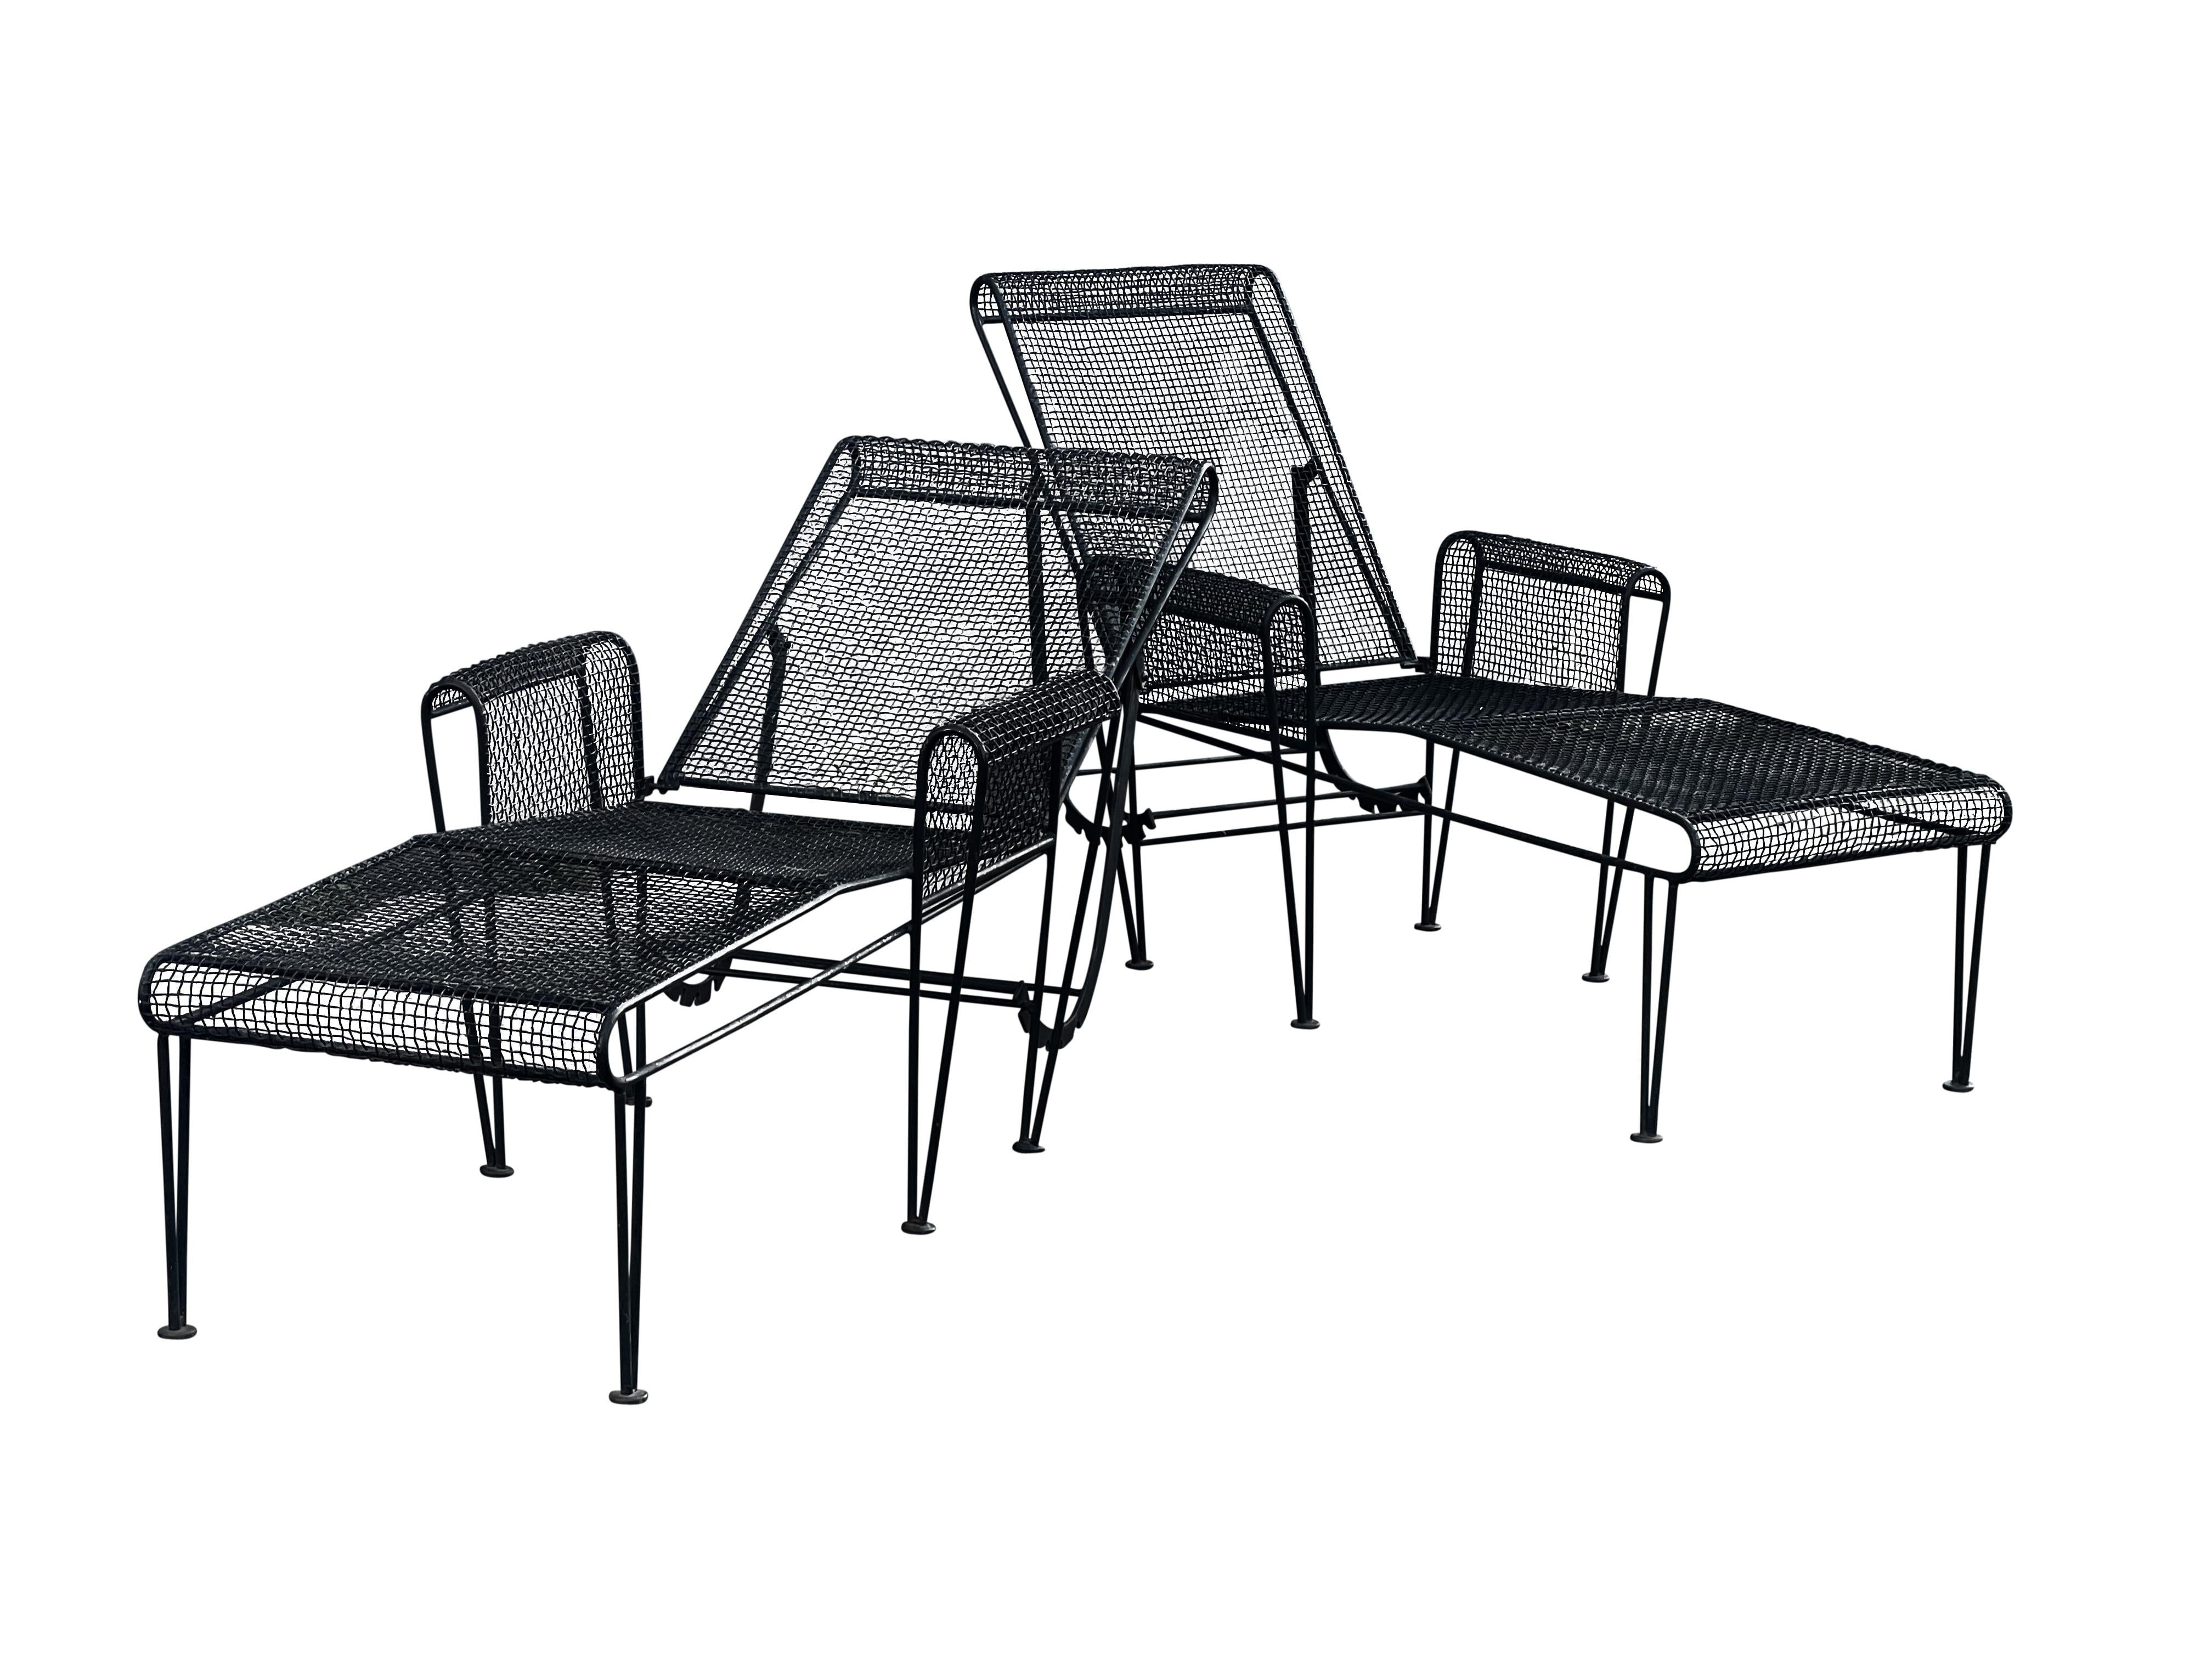 Originating in Owosso, Michigan, Woodard stands as a revered American brand, skillfully handcrafting furniture from robust iron and aluminum. This set of chaise lounges, is a rare and early design by Woodard, showcasing their enduring design ethos